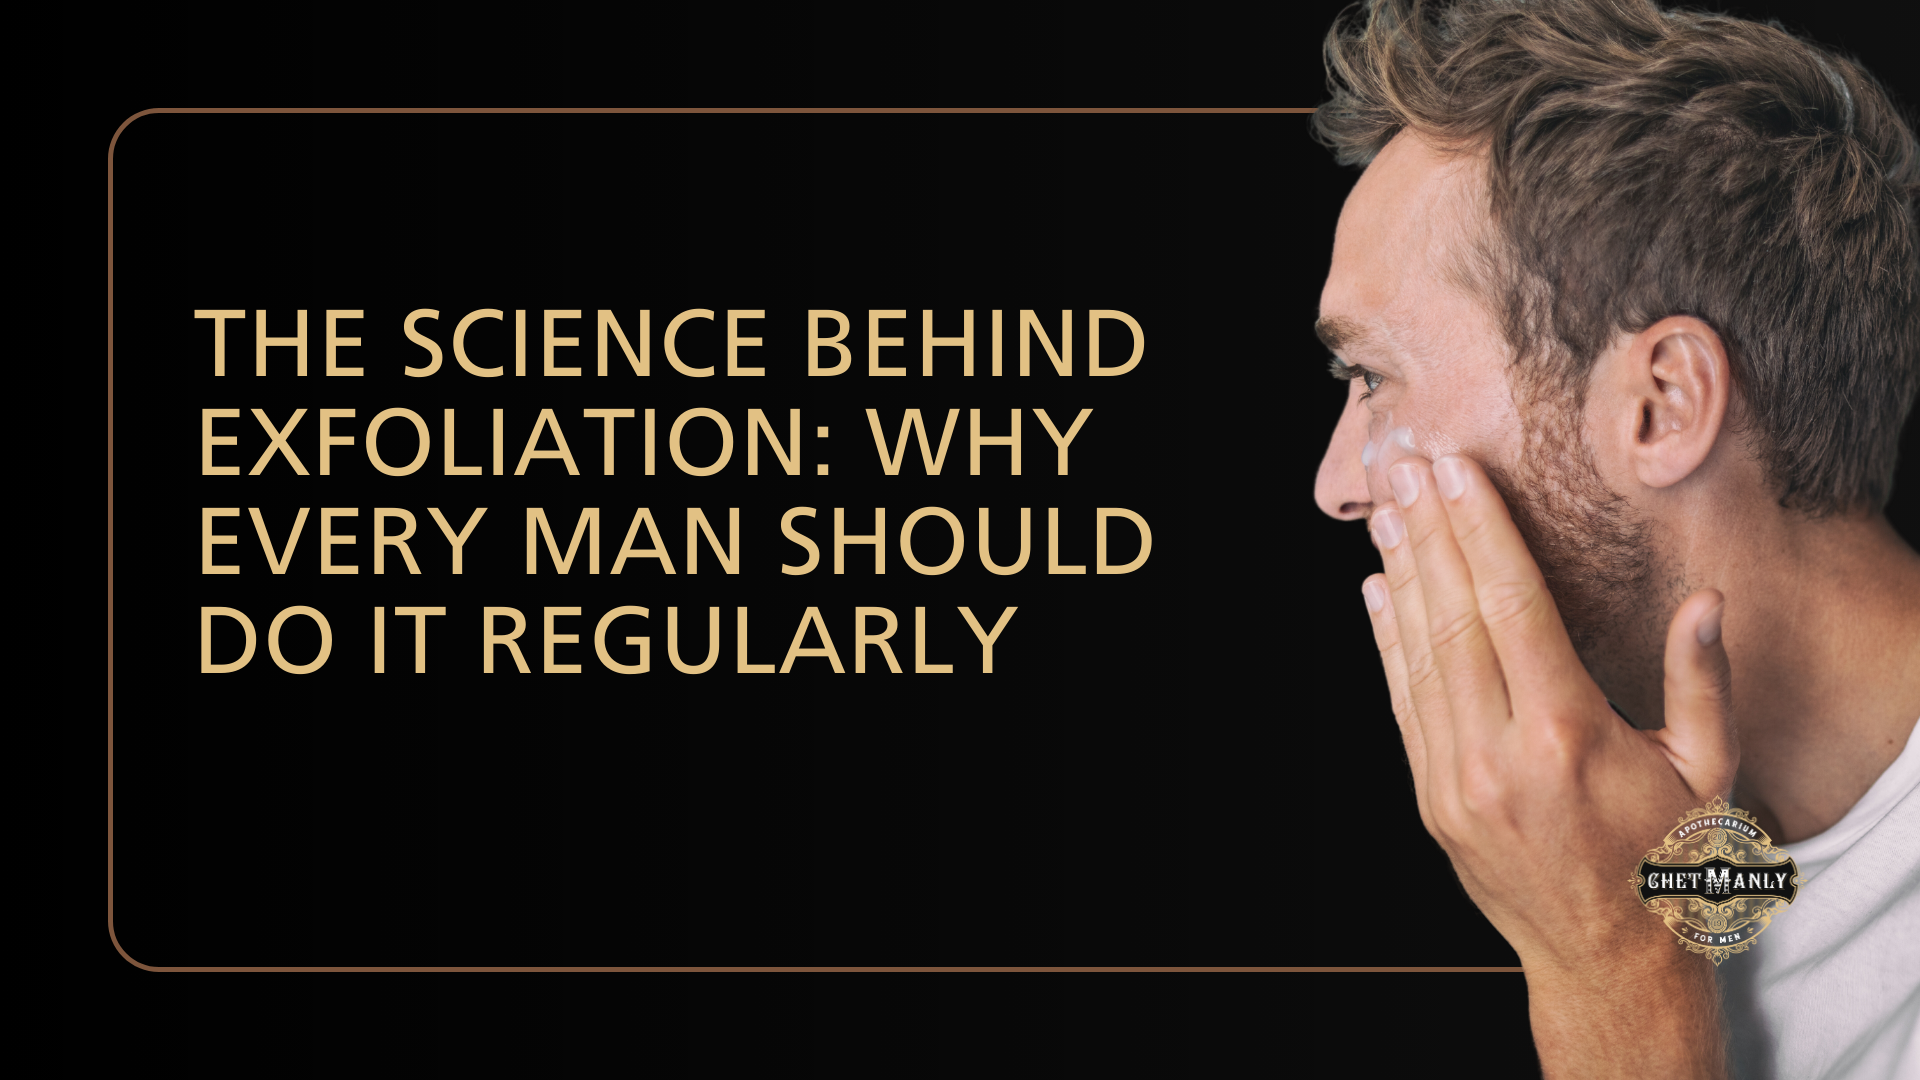 The Science Behind Exfoliation: Why Every Man Should Do It Regularly